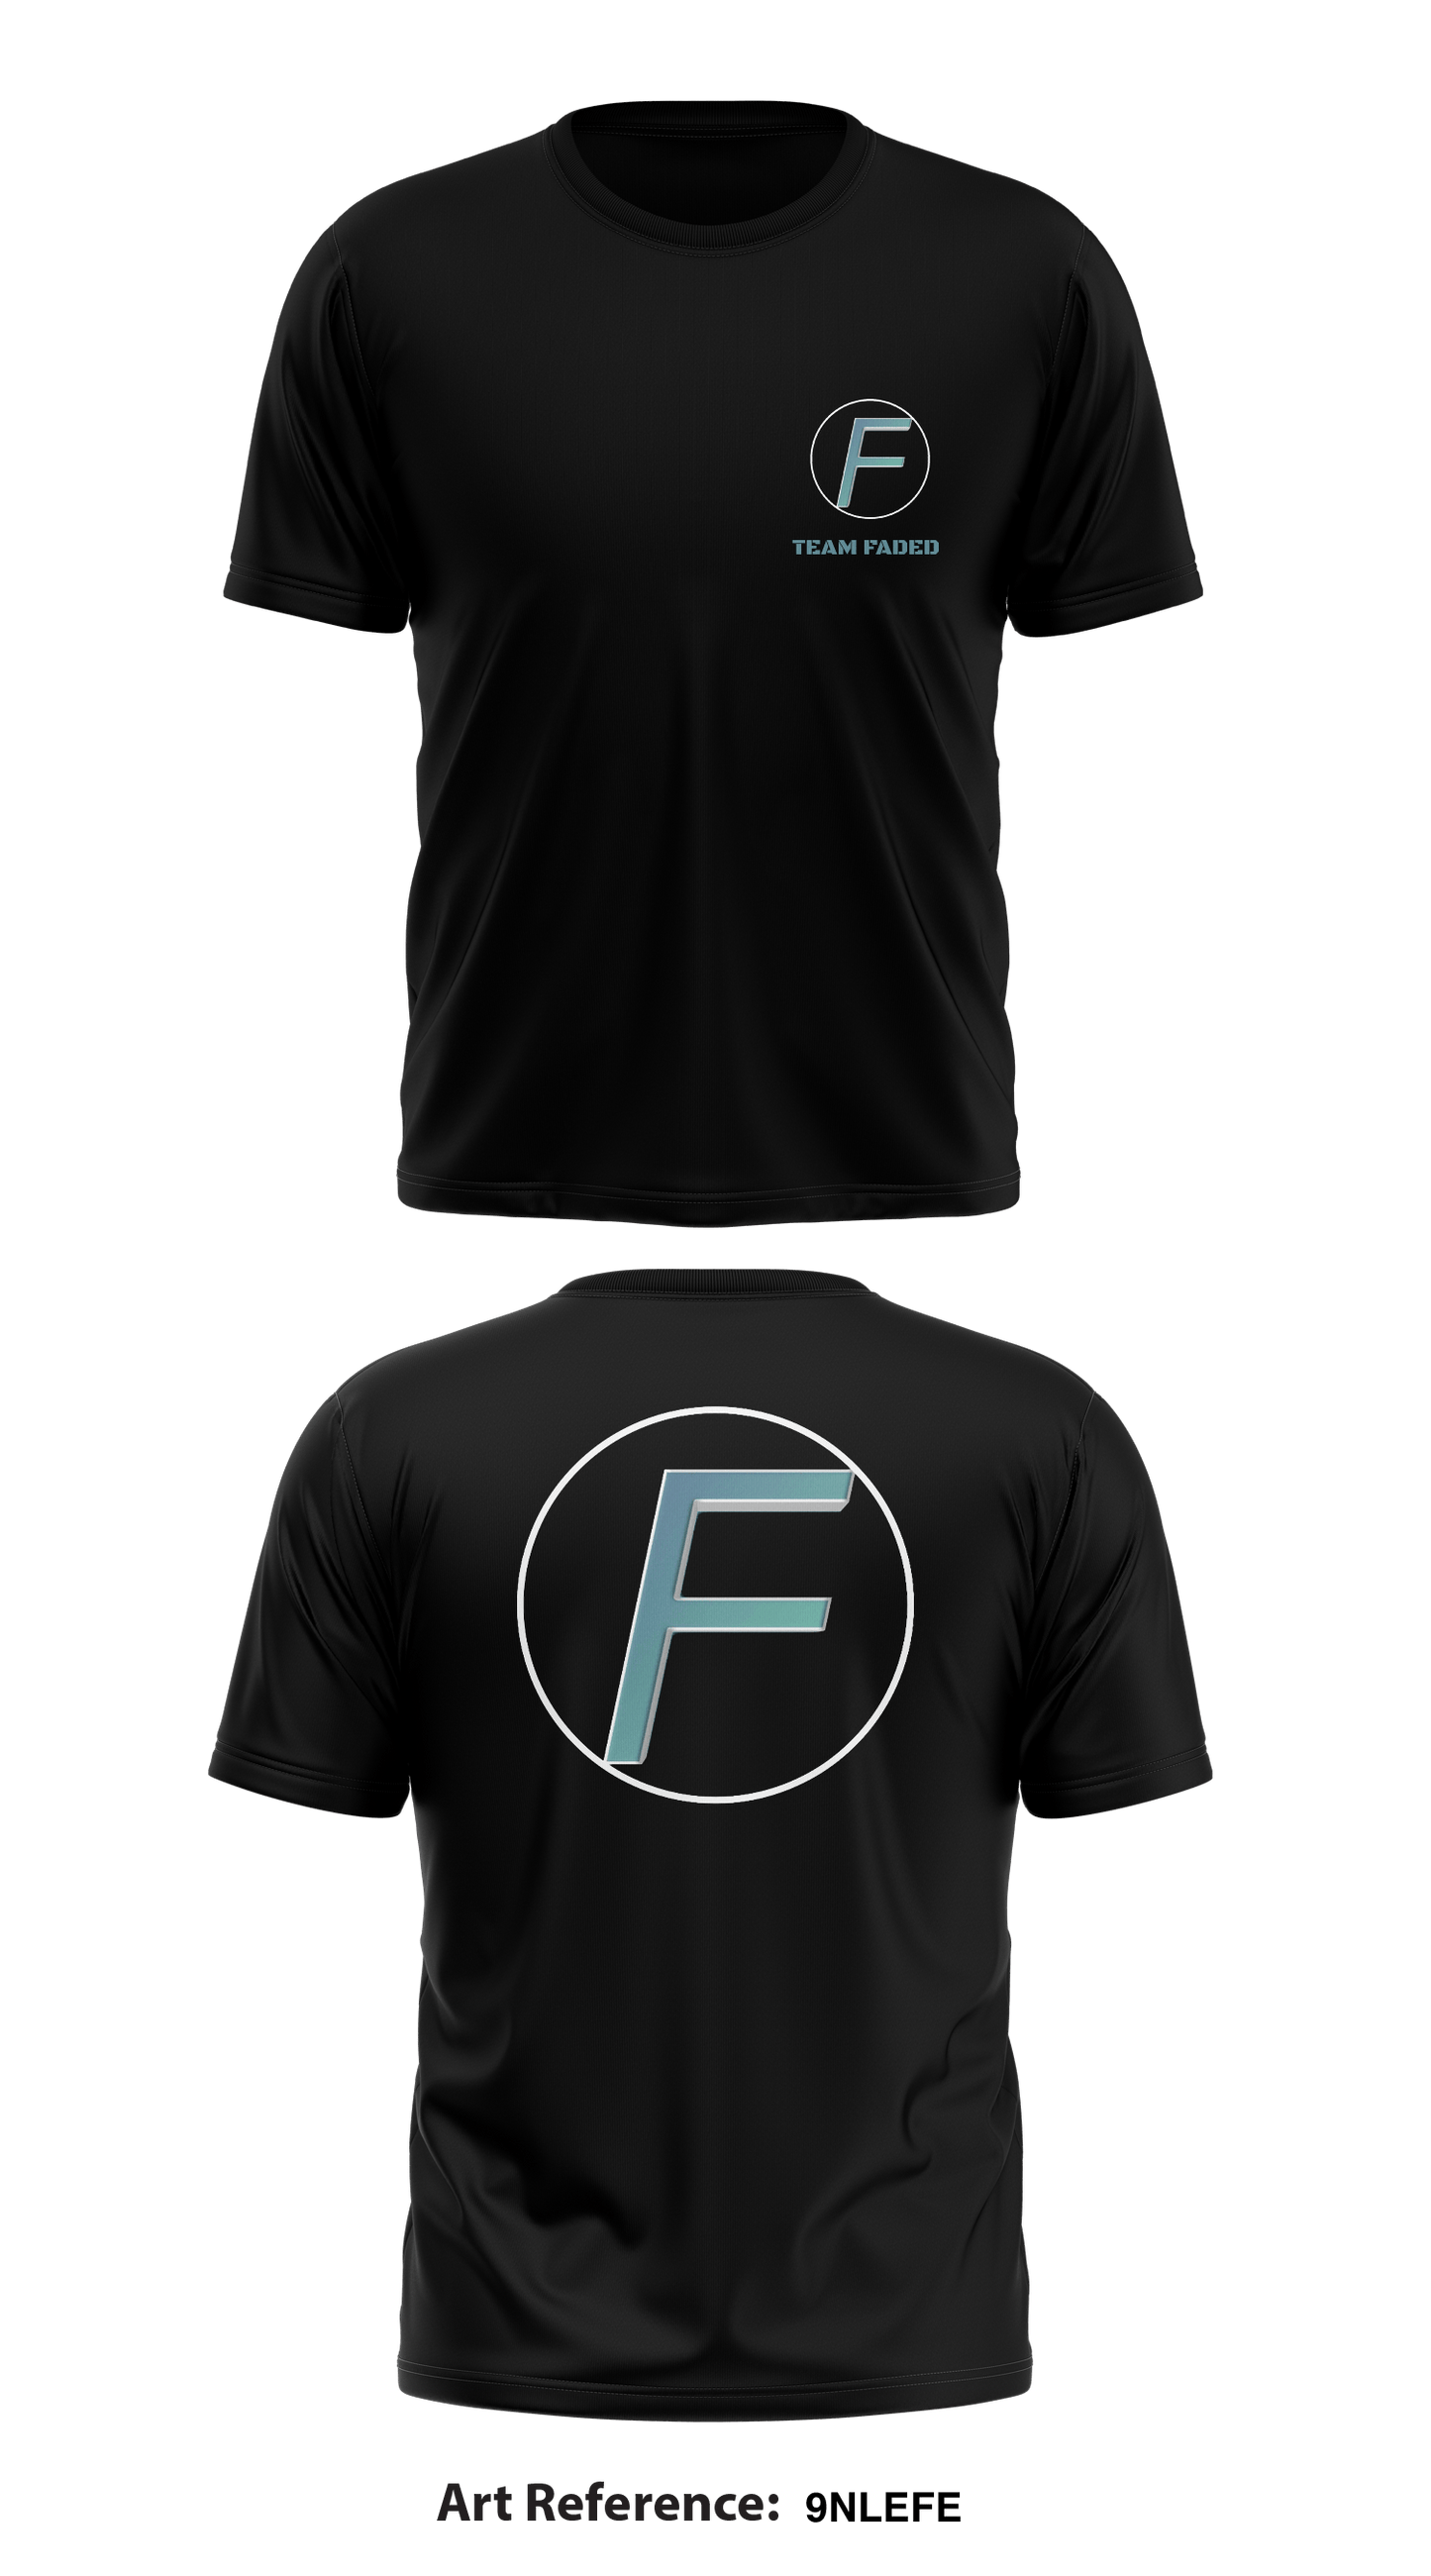 Team Faded Core Men's SS Performance Tee - 9NLEfE